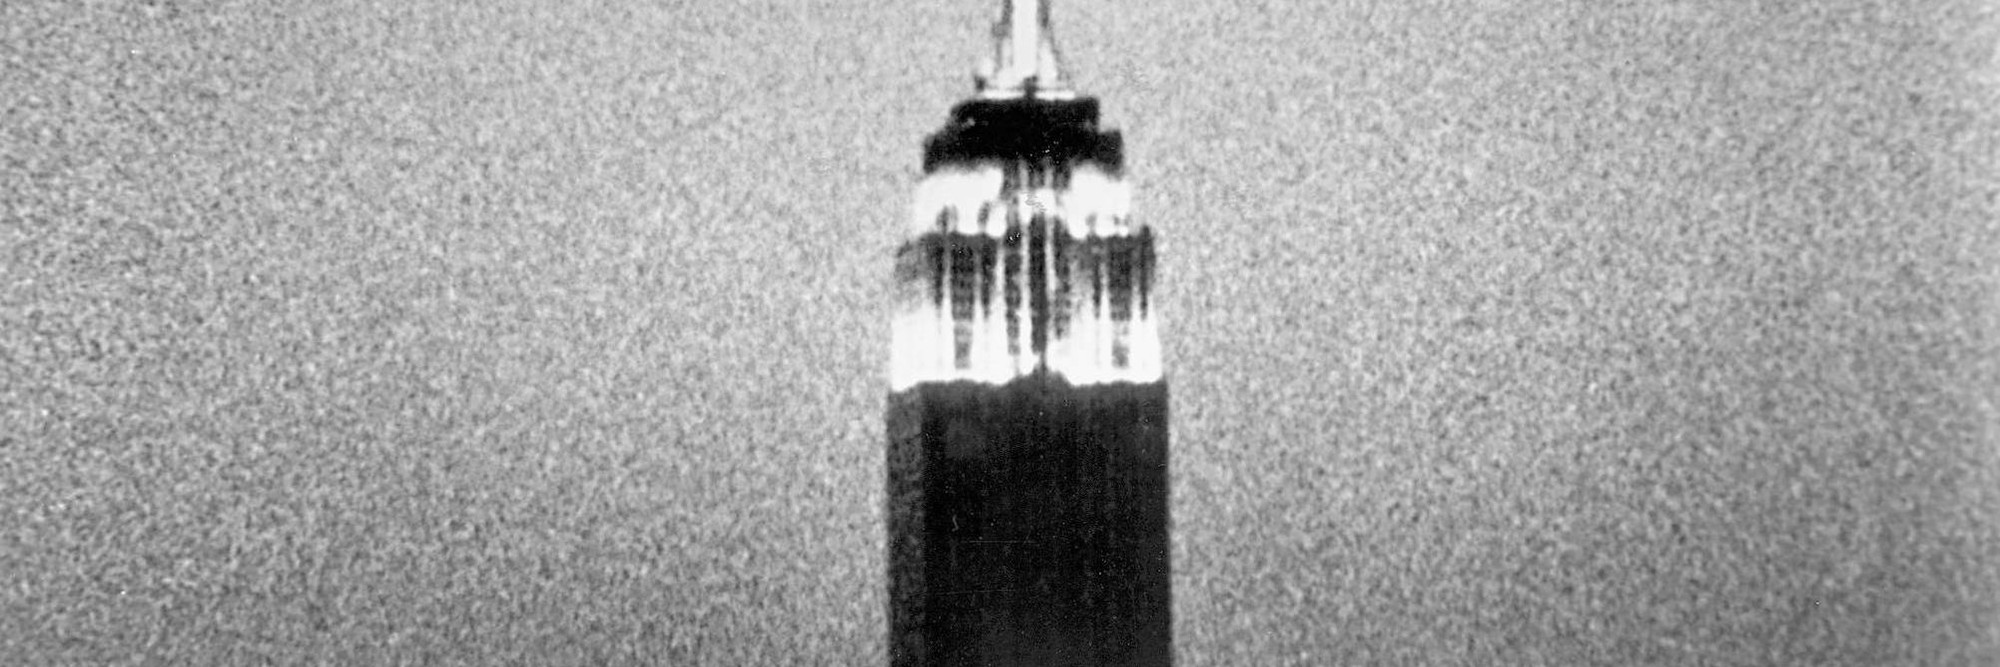 Andy Warhol. Empire. 1964. 16mm film transferred to video (black and white, silent), 8 hrs. 5 min. at 16 fps. © 2020 Andy Warhol Foundation for the Visual Arts / Artists Rights Society (ARS), New York